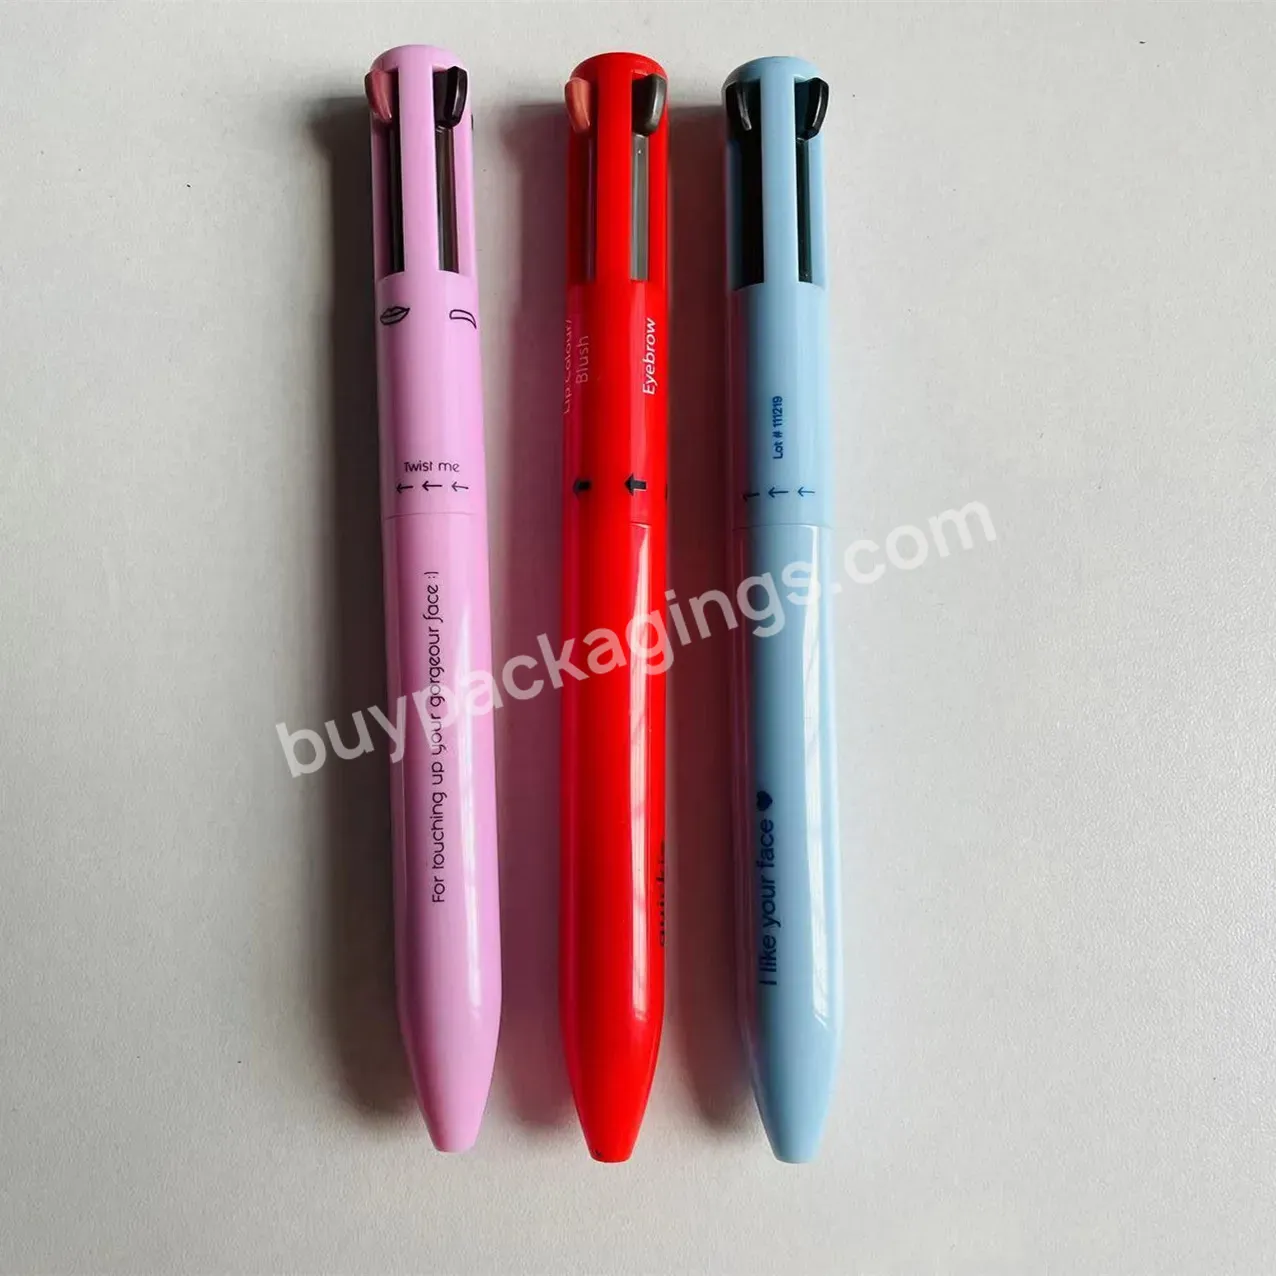 Customize 4 Refills 4 Colors 4 In 1 Makeup Pen Empty Container Plastic Packaging For Eyebrow Eyeliner Lipliner Highlighter